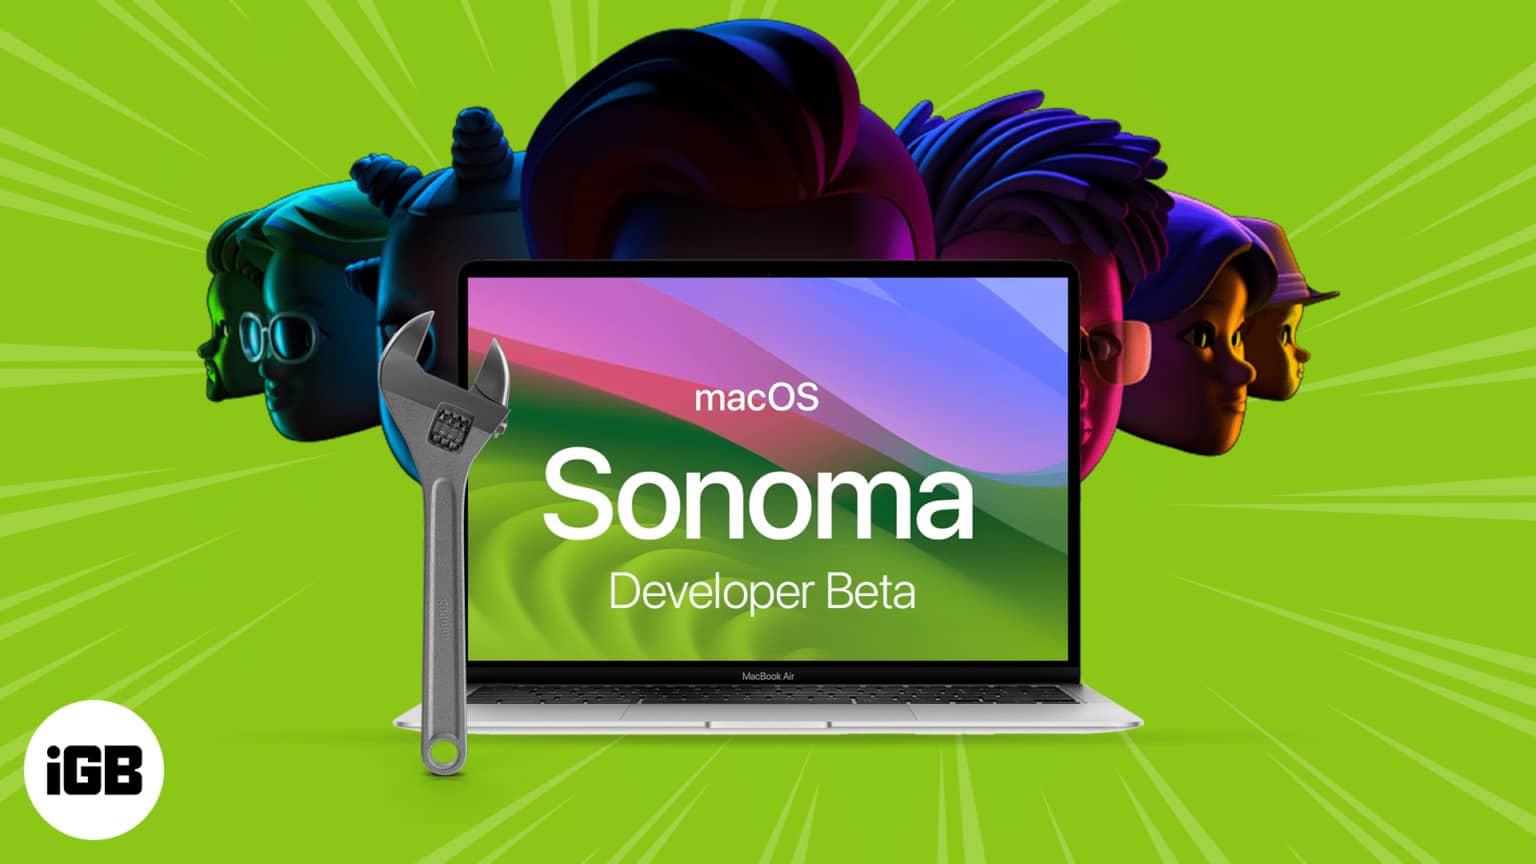 How to download macOS Sonoma beta